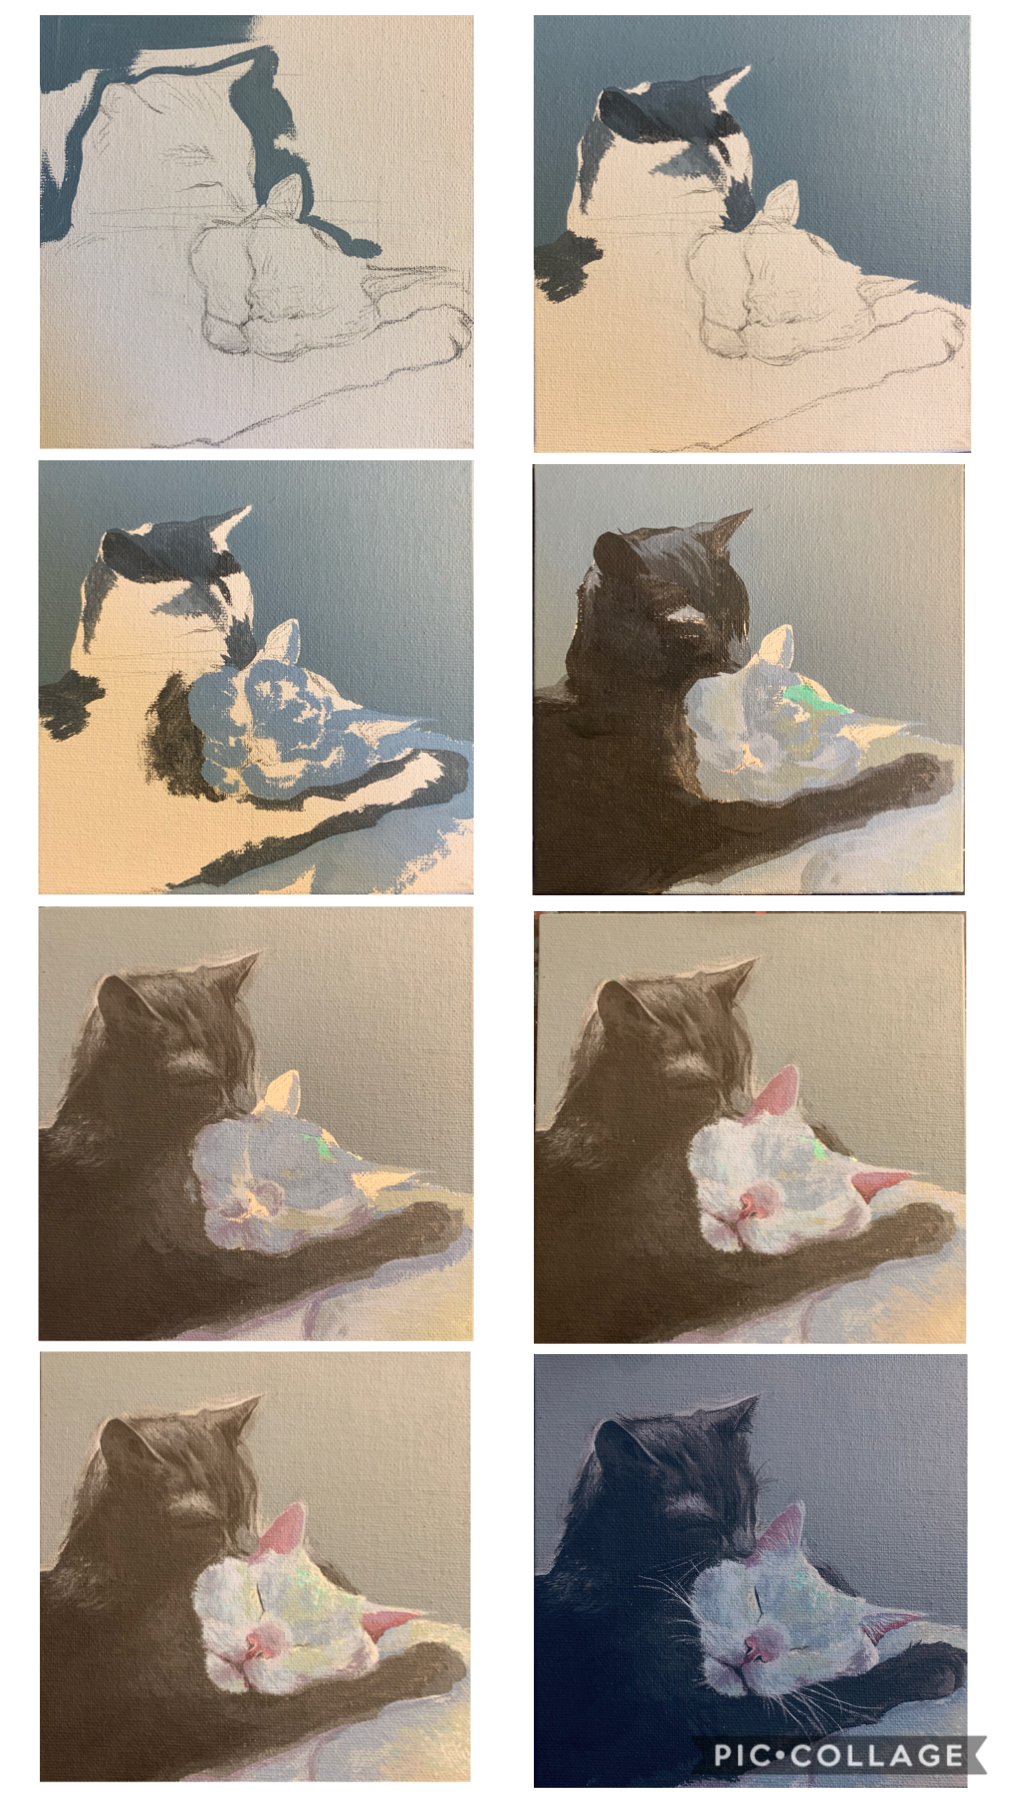 tap
here’s the process of a painting I did today of some kittens. I haven’t had much time to paint lately so this felt really good. 
My lighting es no bueno but the final image is edited so the colors look more like the real thing. 
I’ll remix a larger pi